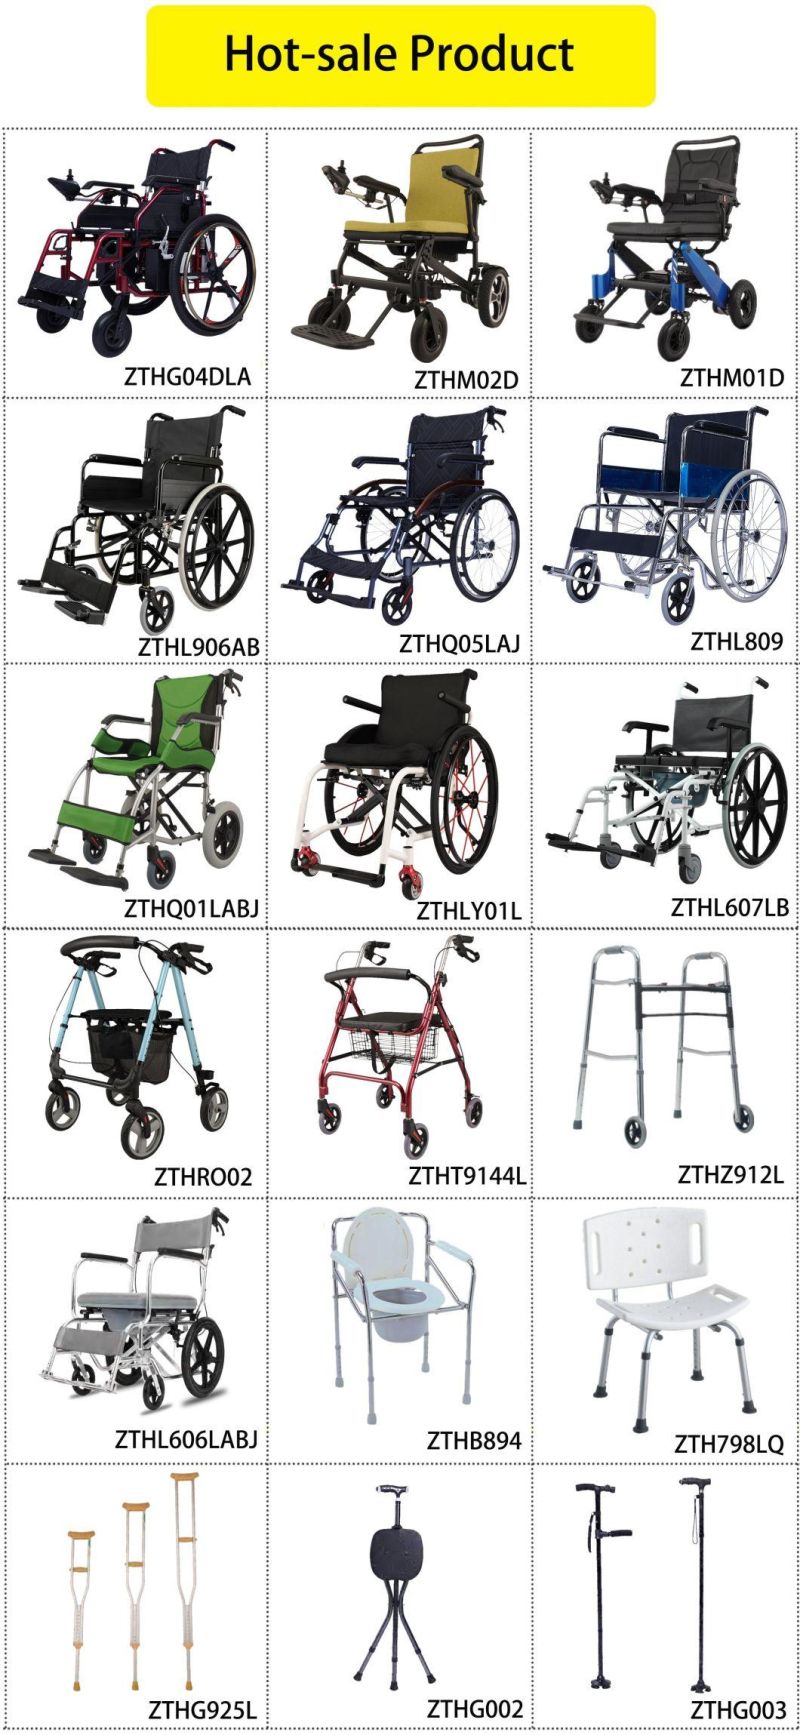 Without Anti-Slip Foot Glue Bath Seat Easy Carry Bathroom Aluminum Shower Safety Chair for Elderly People and Pregnant Woman Home Care Toilet Use